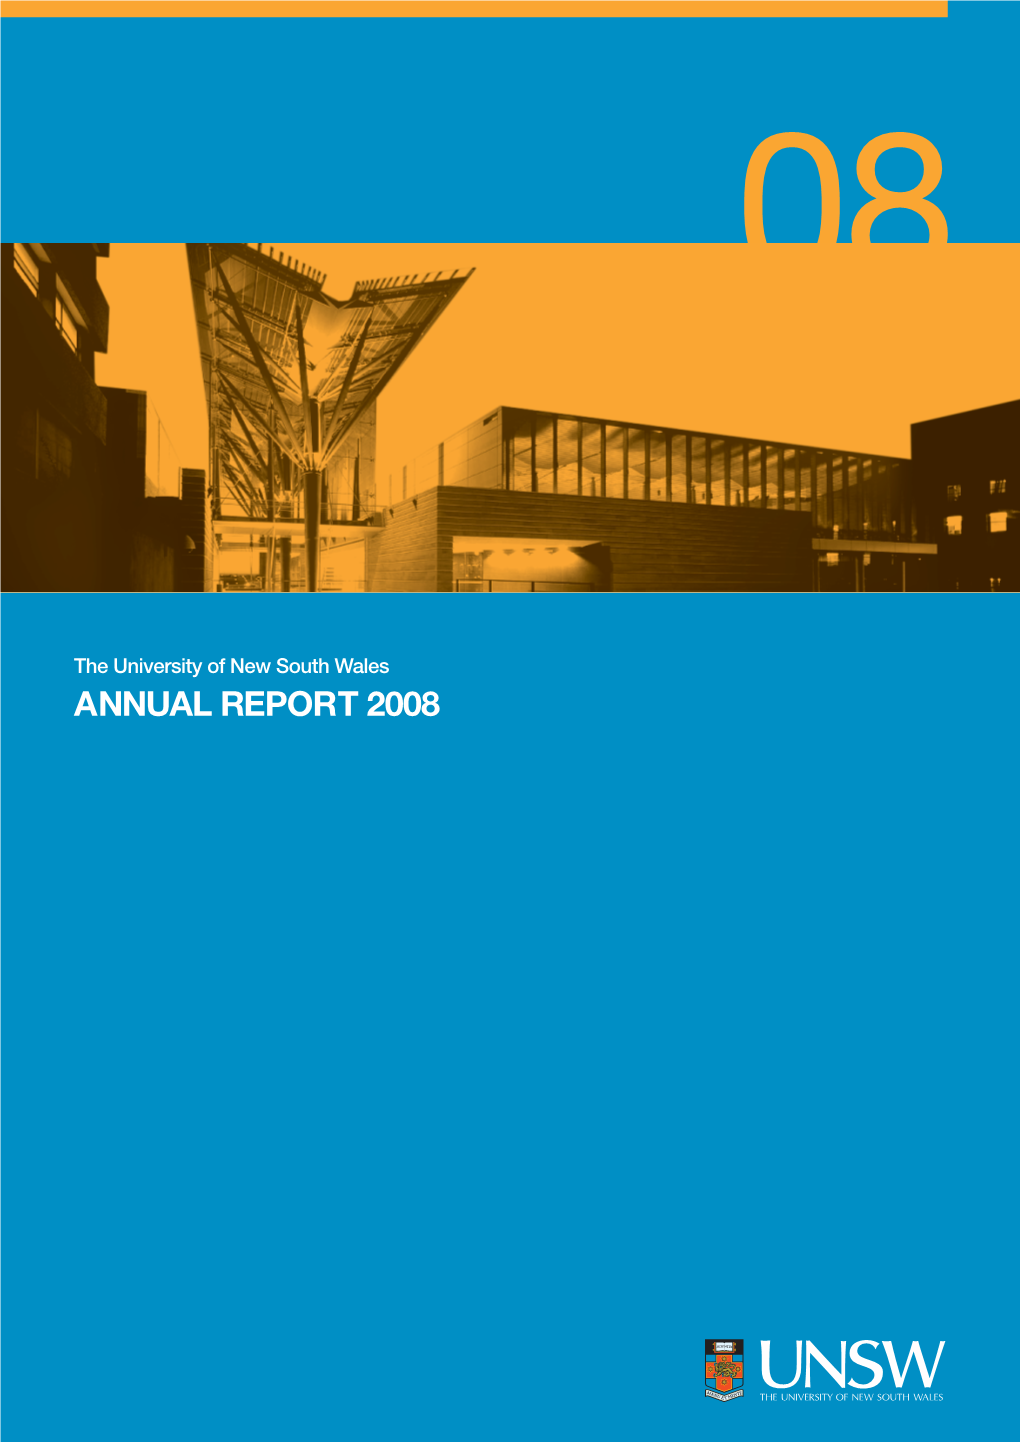 Annual Report 2008 the University of New South Wales ANNUAL REPORT 2008 Volume One